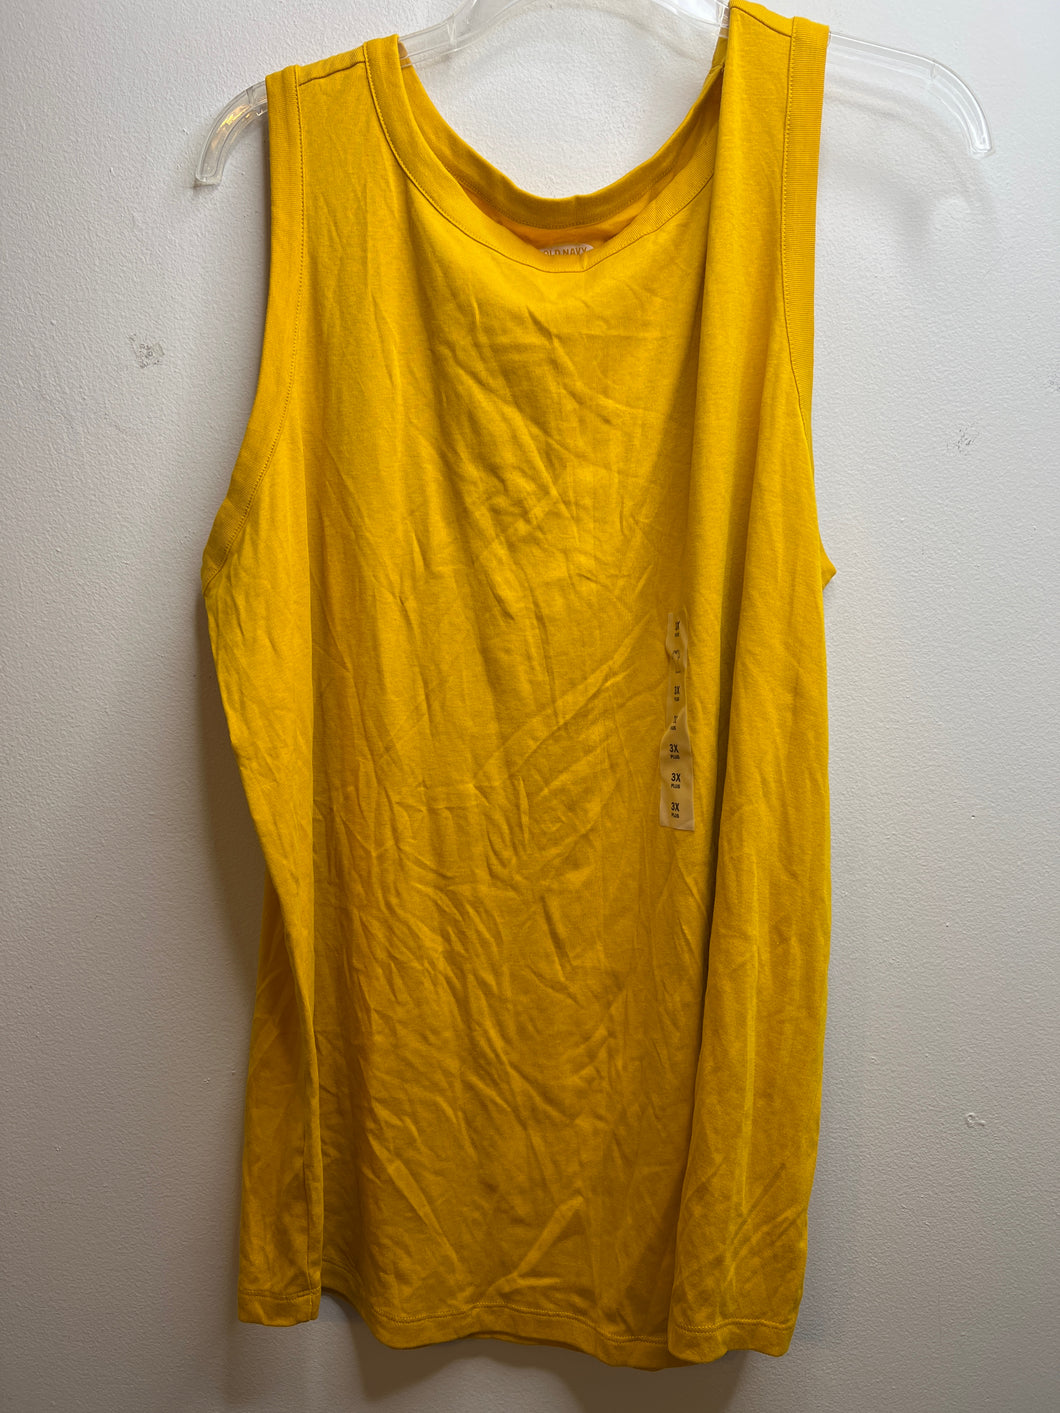 Womens Size 3X old navy Yellow Tank